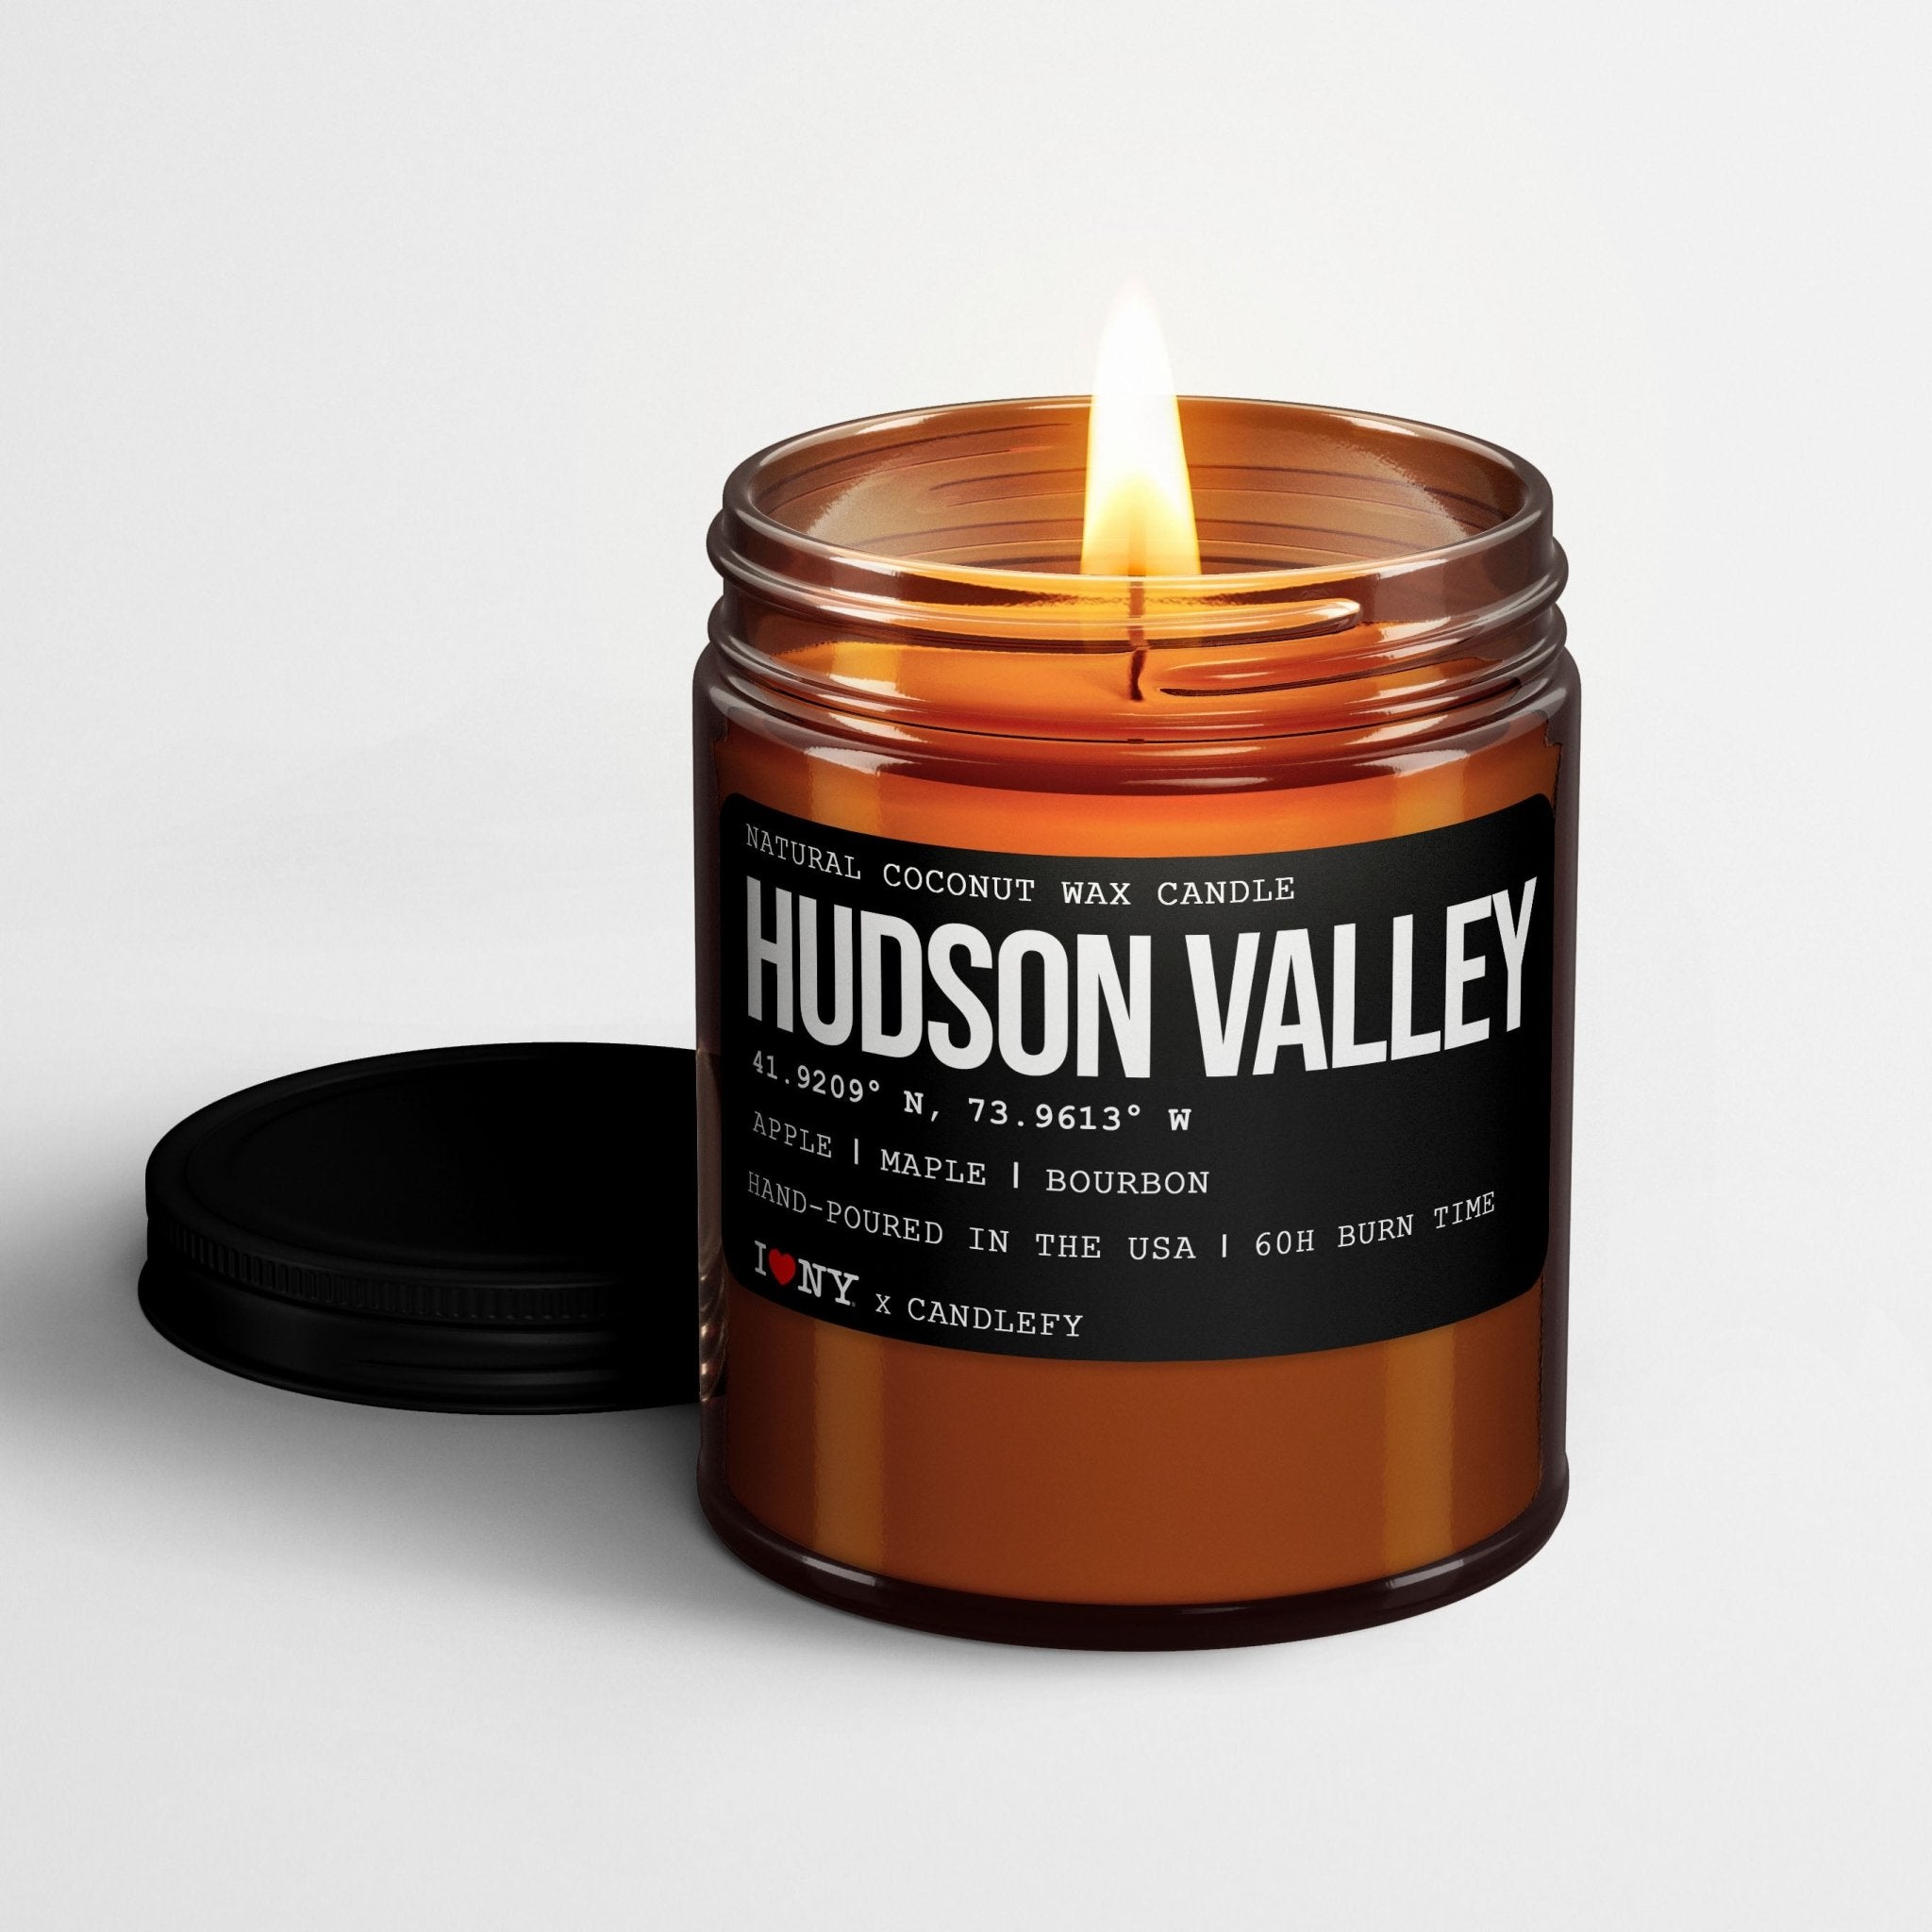 Hudson Valley: New York Scented Candle (Apple, Maple, Bourbon) - Candlefy